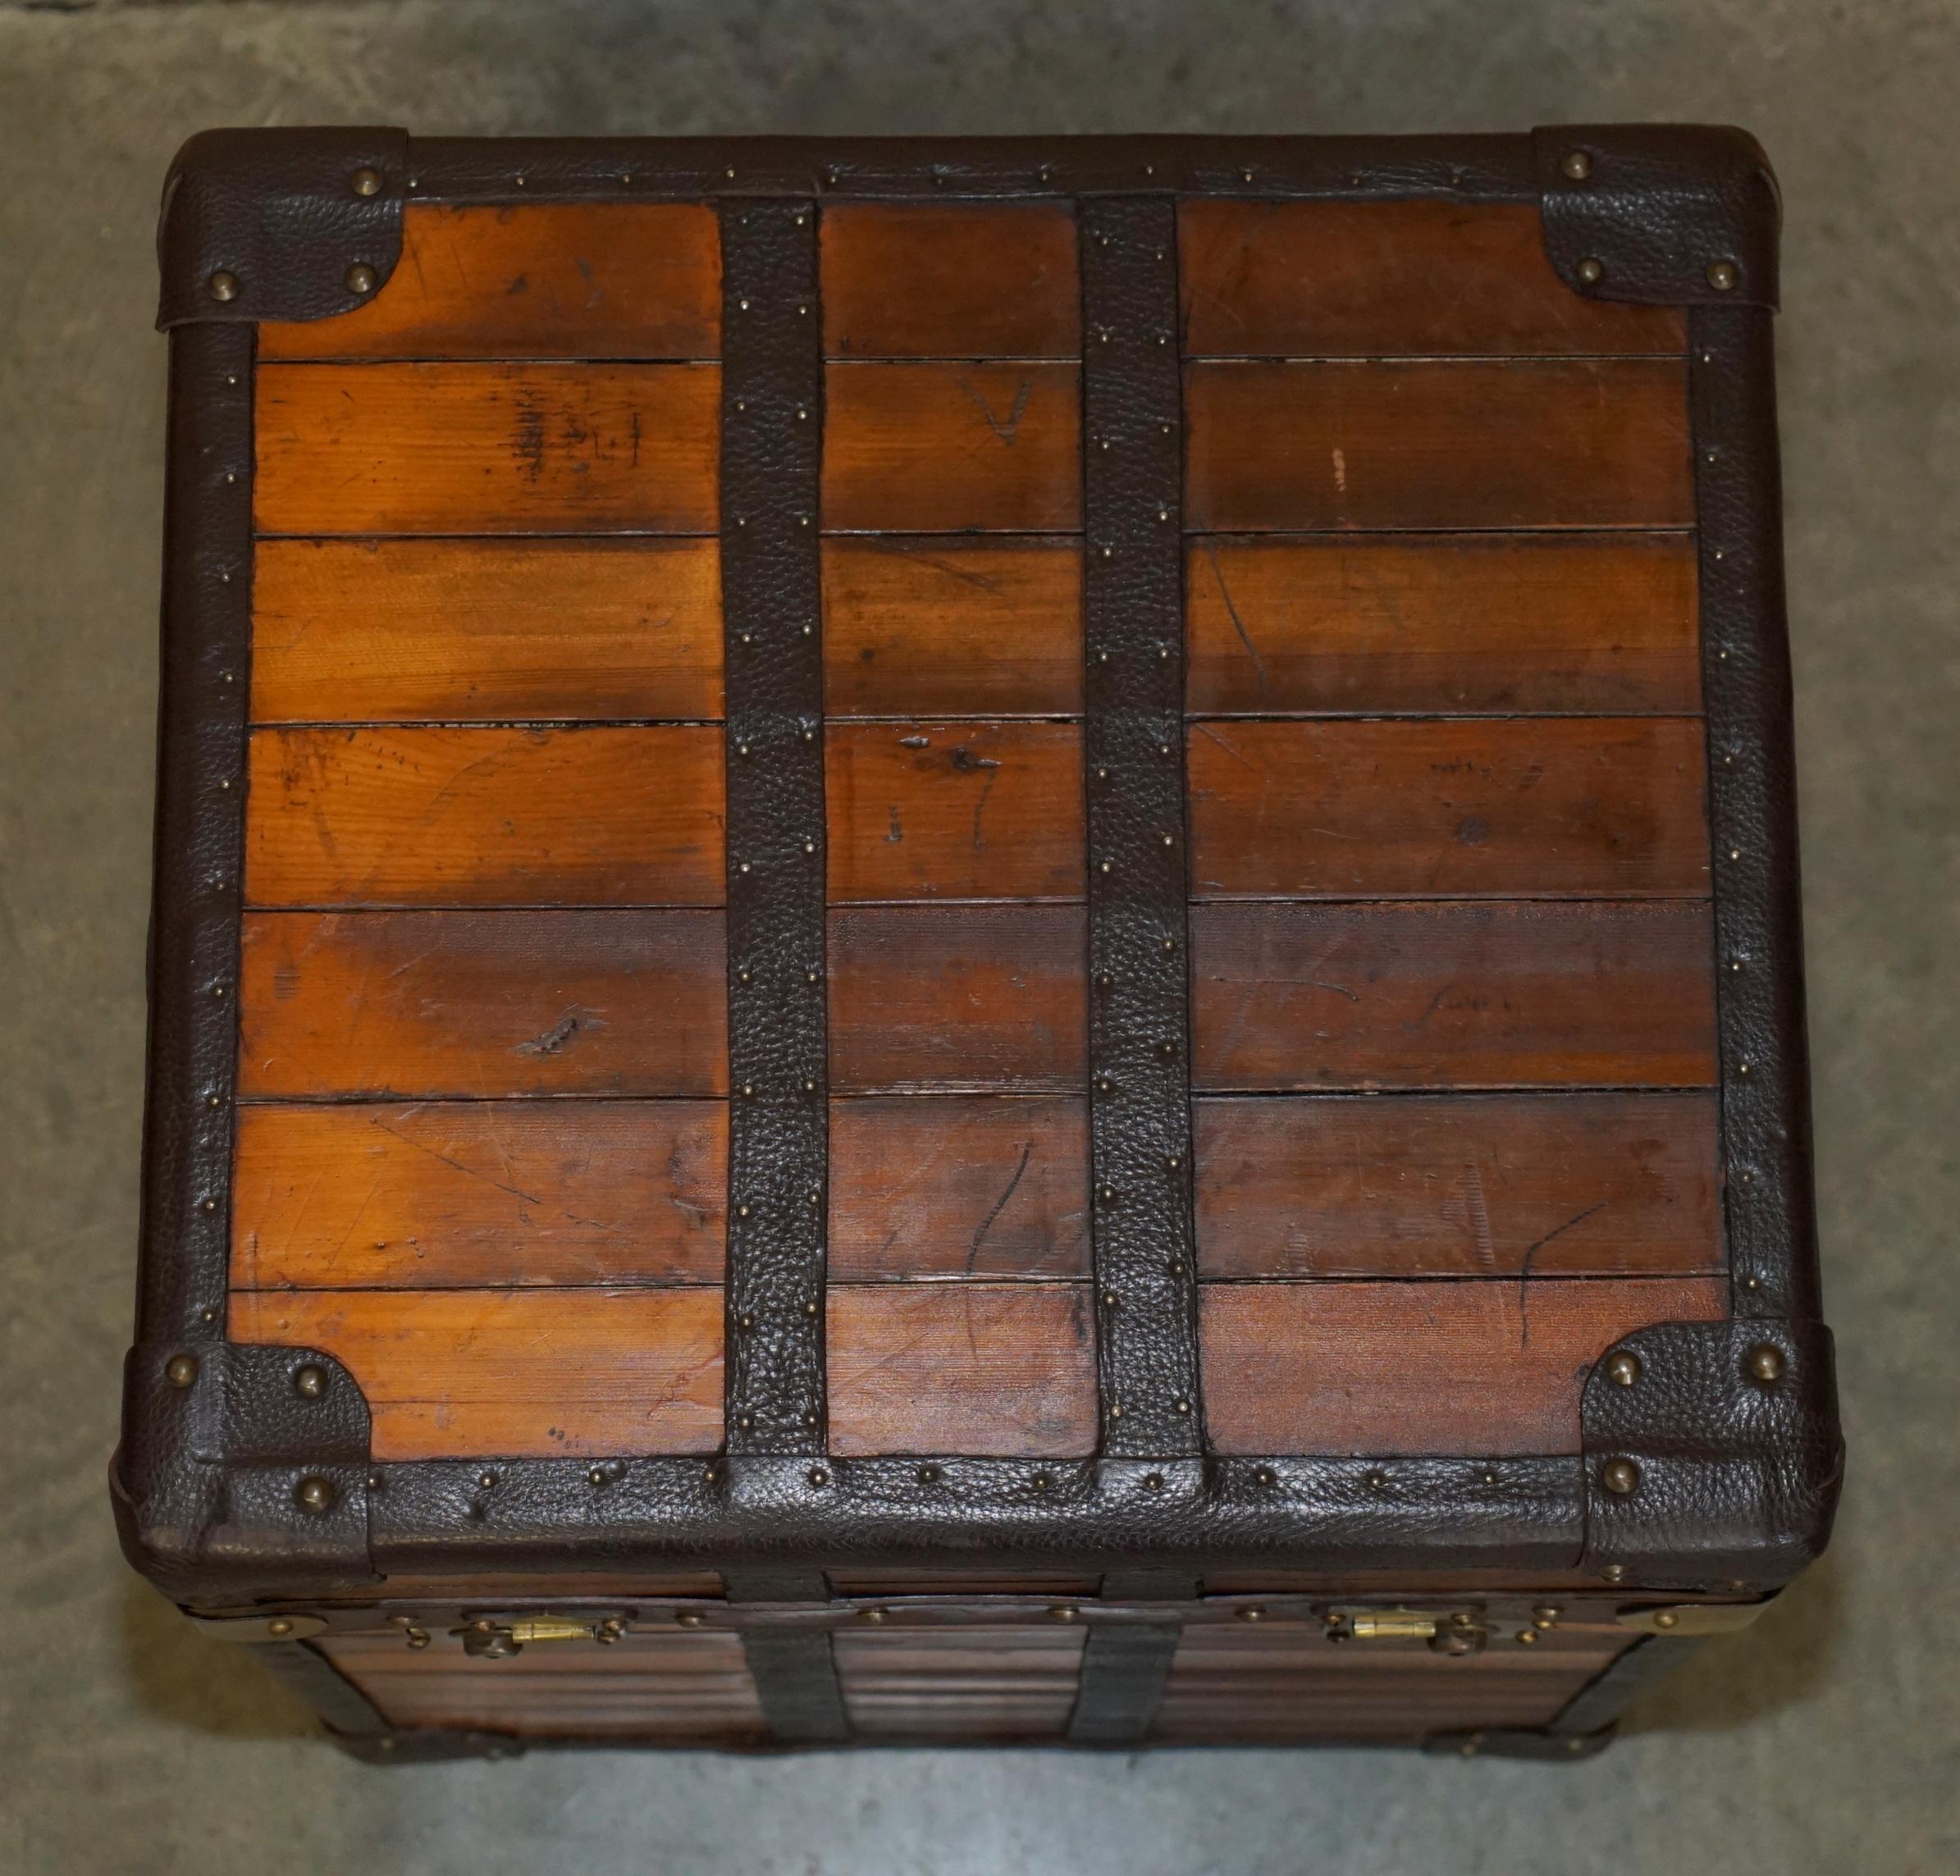 20th Century PAIR OF STUNNING ViNTAGE ENGLISH SIDE TABLES STORAGE TRUNKS SLATTED WOOD LEATHER